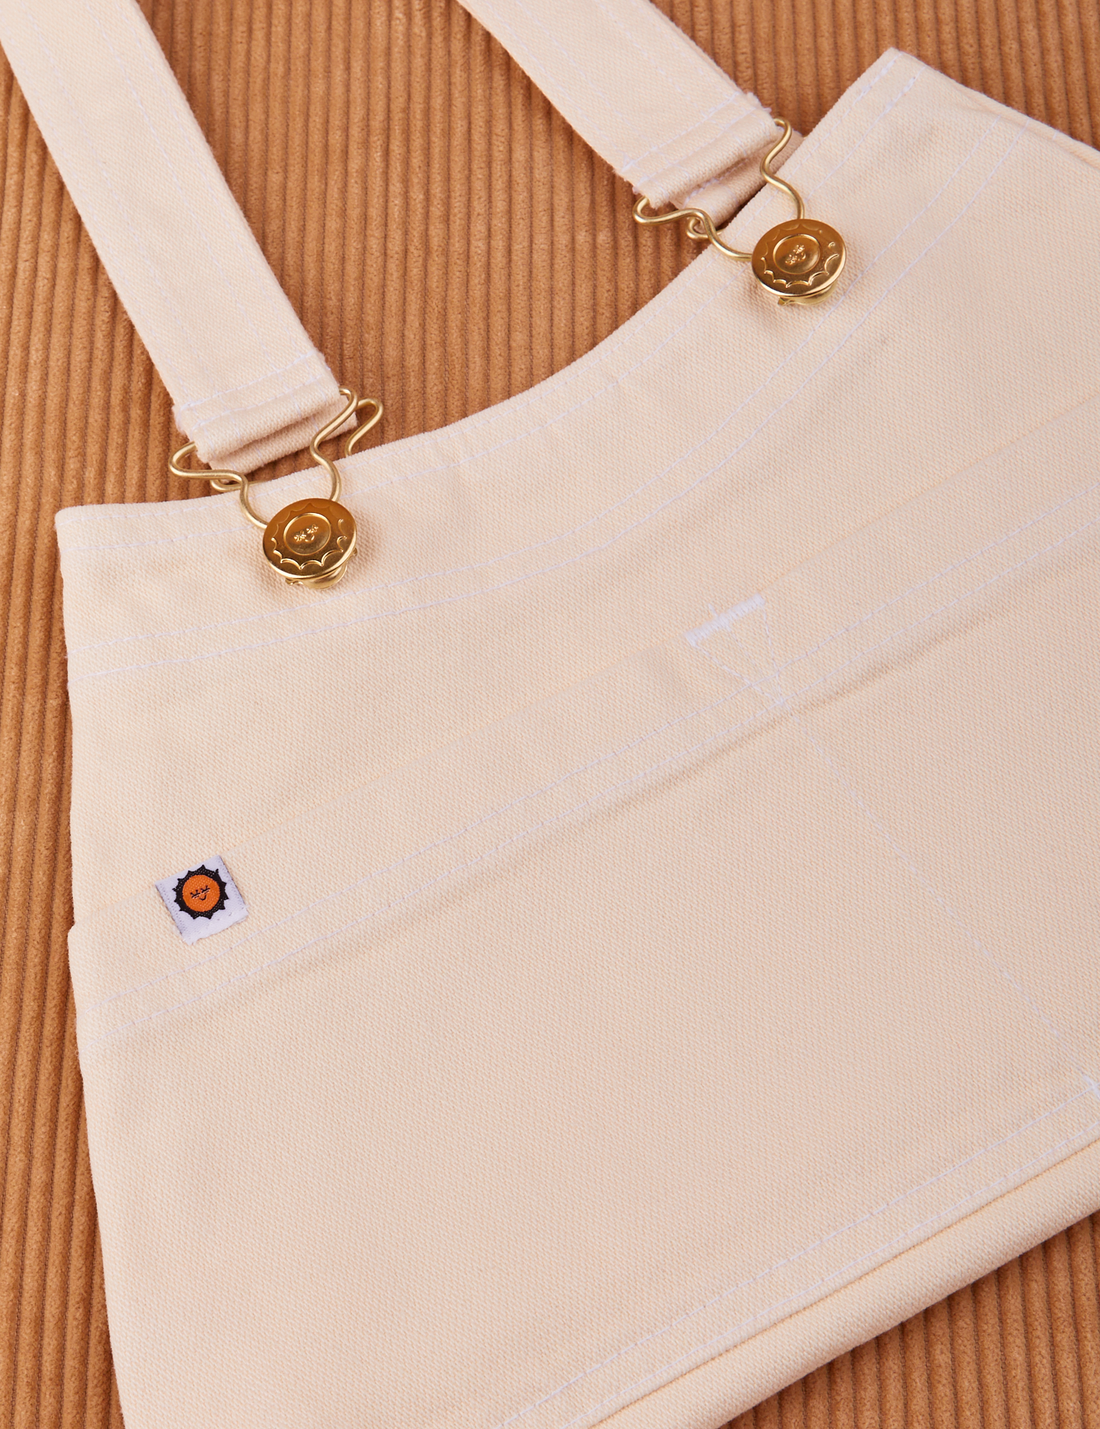 Overall Handbag in Vintage Off-White. Brass sun baby buttons and hardware